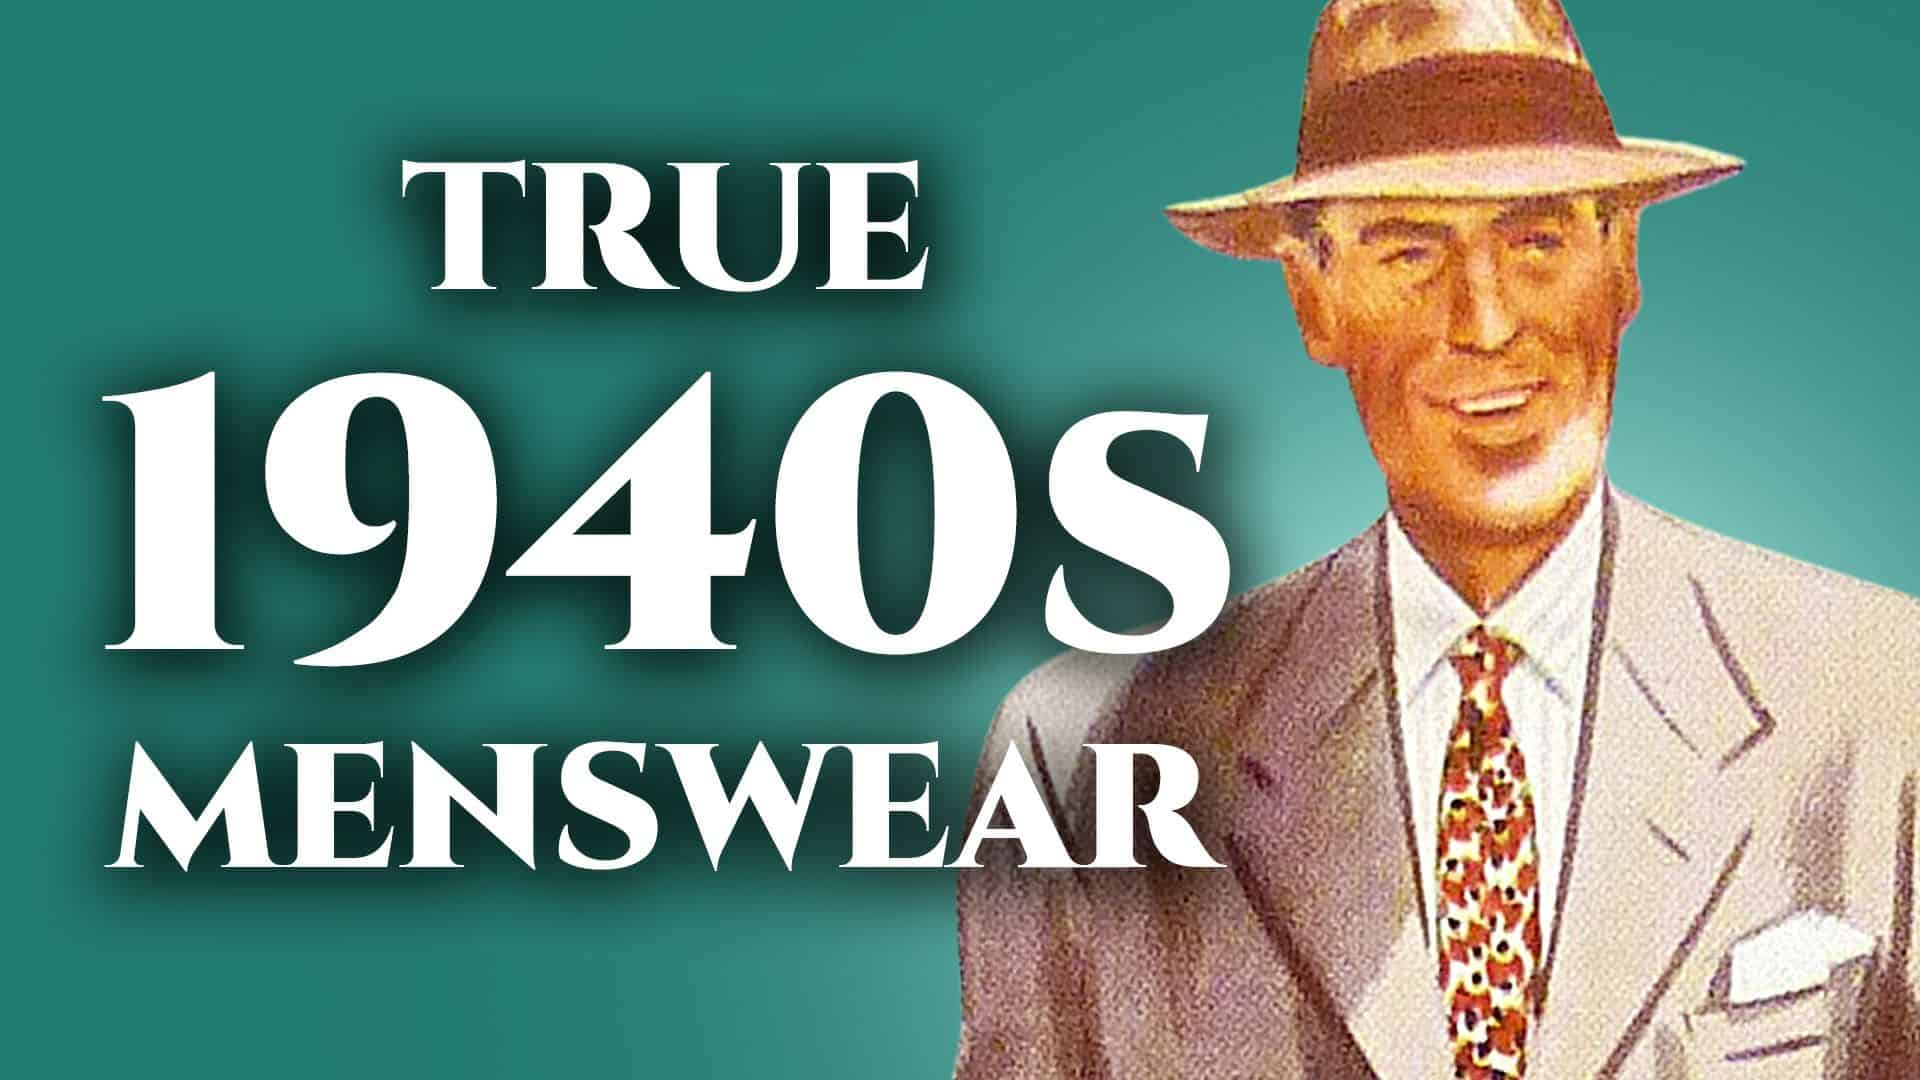 fjende dynasti tyv What Men REALLY Wore In The 1940s | Gentleman's Gazette